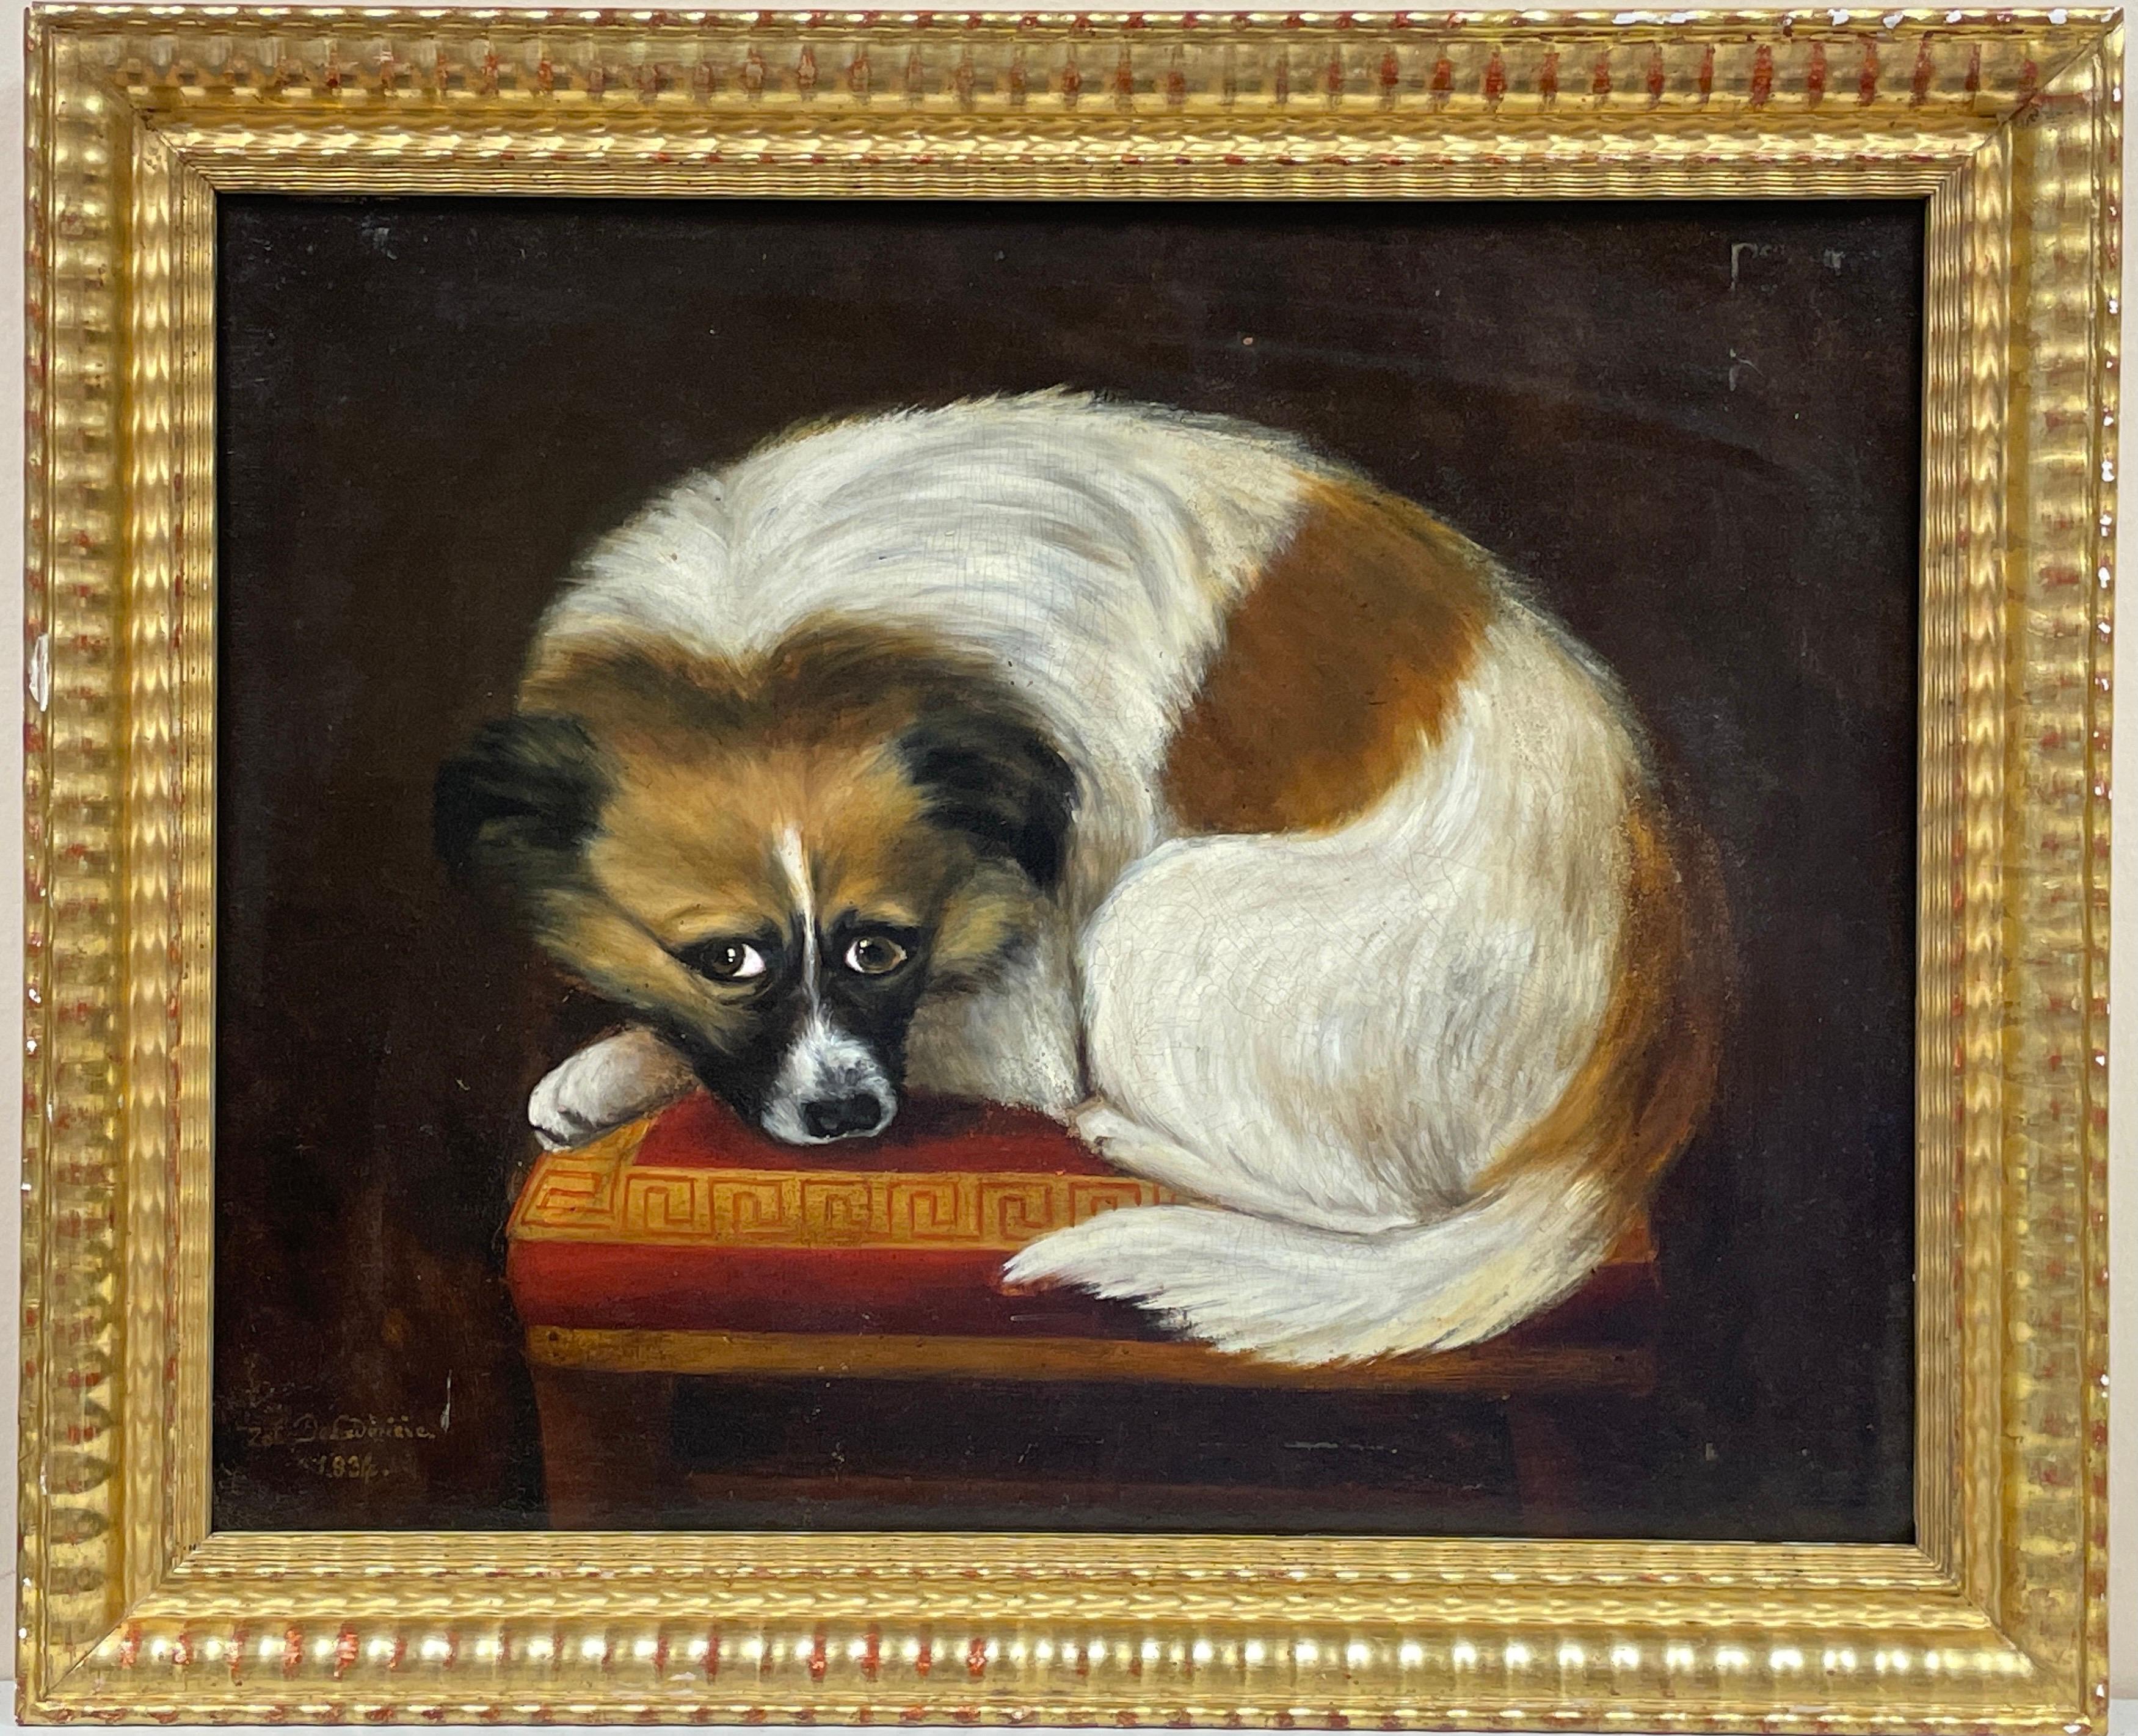 French 1830's Interior Painting - 1830's French Dog Painting - Signed Oil of Dog resting on Cushion - Gilt Framed